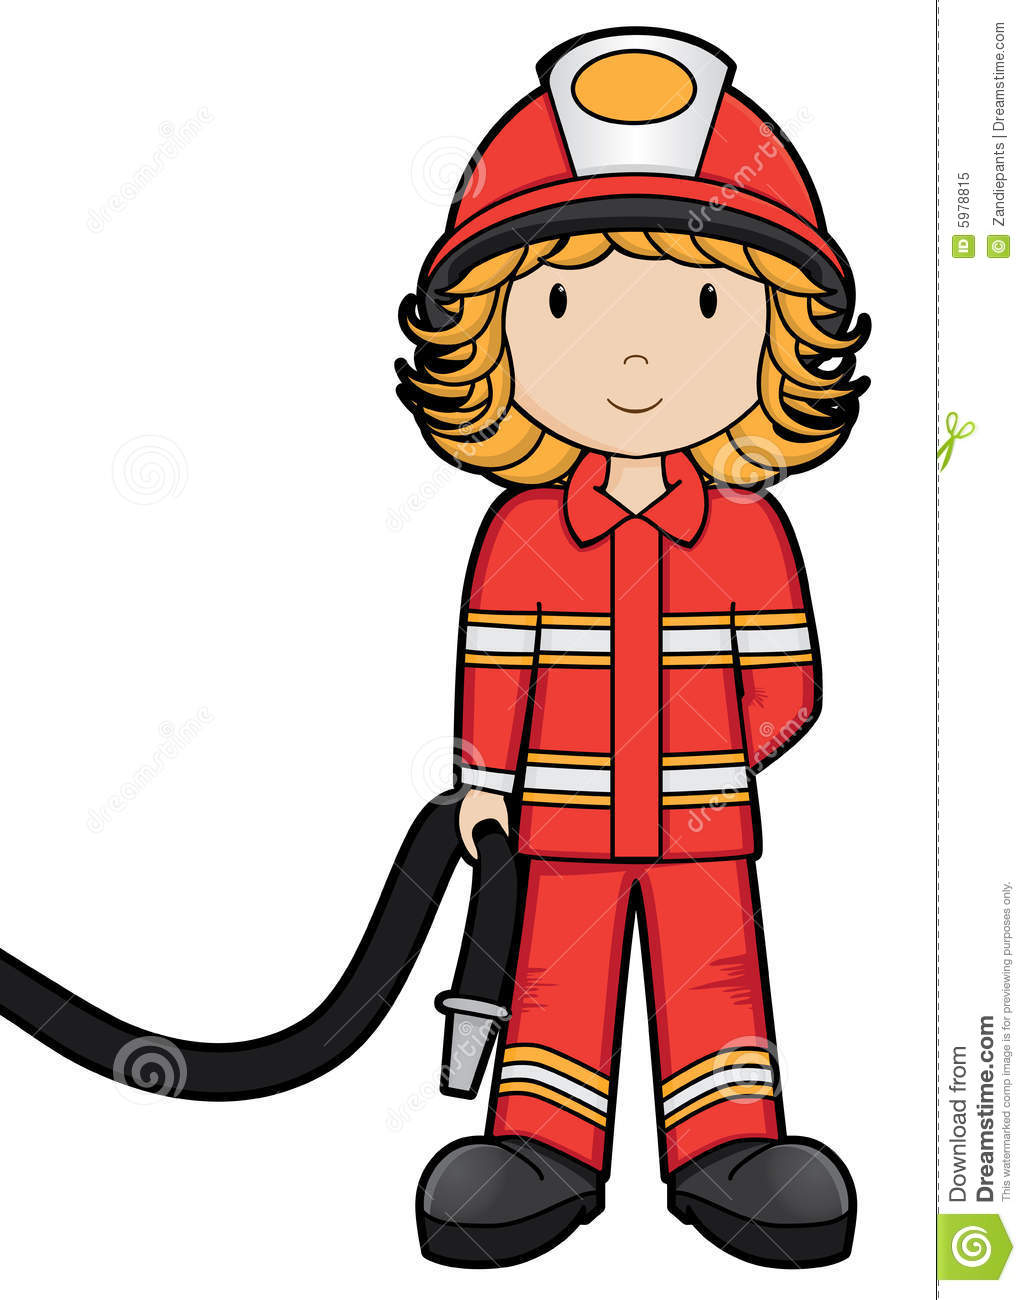 Fire Fighter Clip Art. Fire Girl Vector Royalty Free Stock Photo Image 5978815